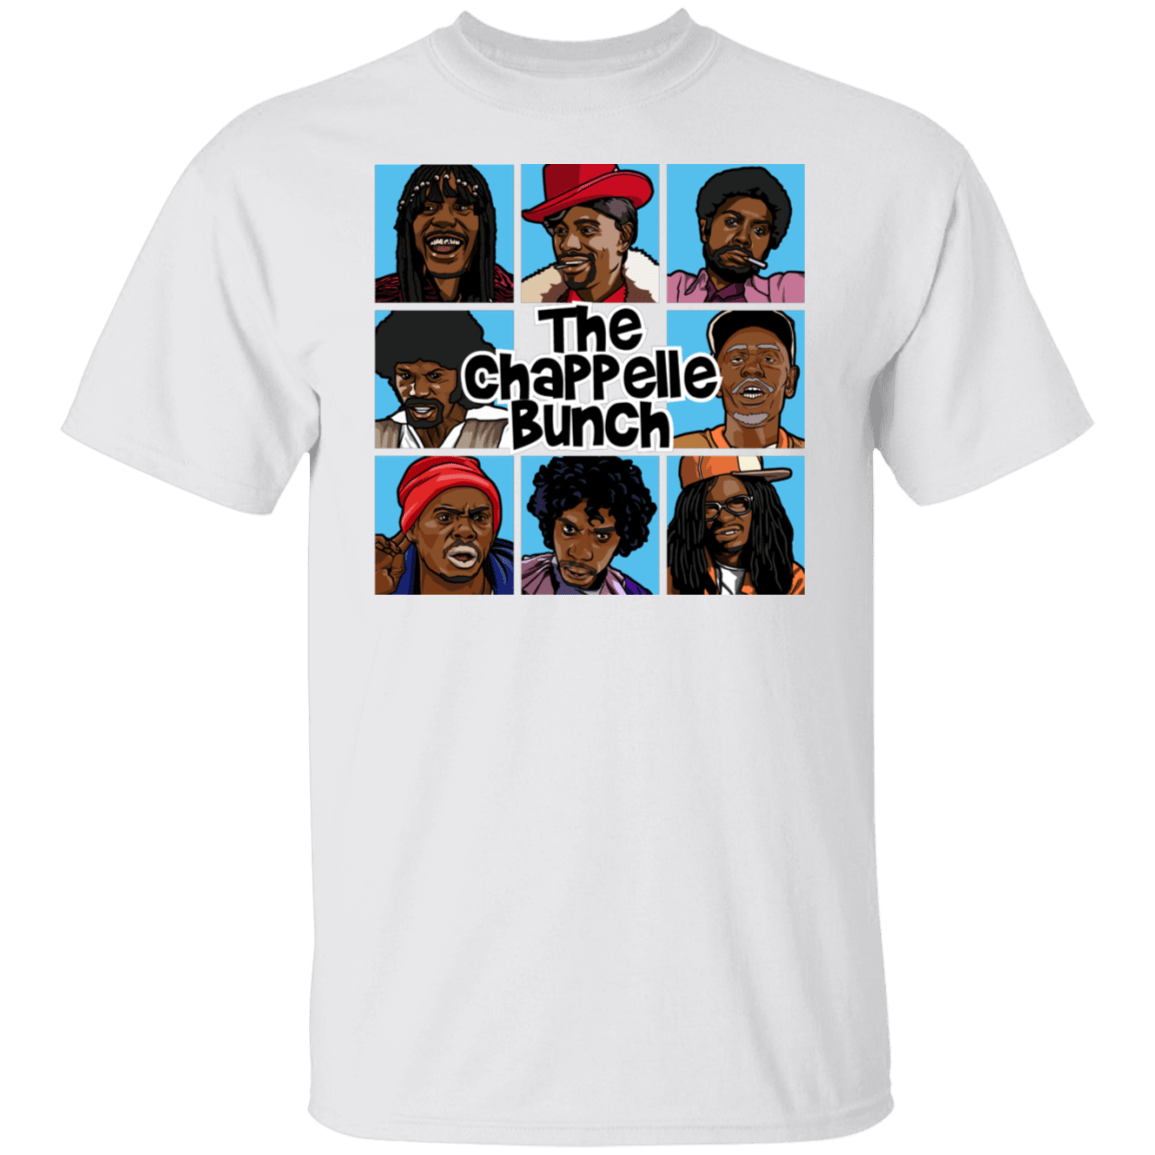 T-Shirts White / S The Chappelle Bunch T-Shirt